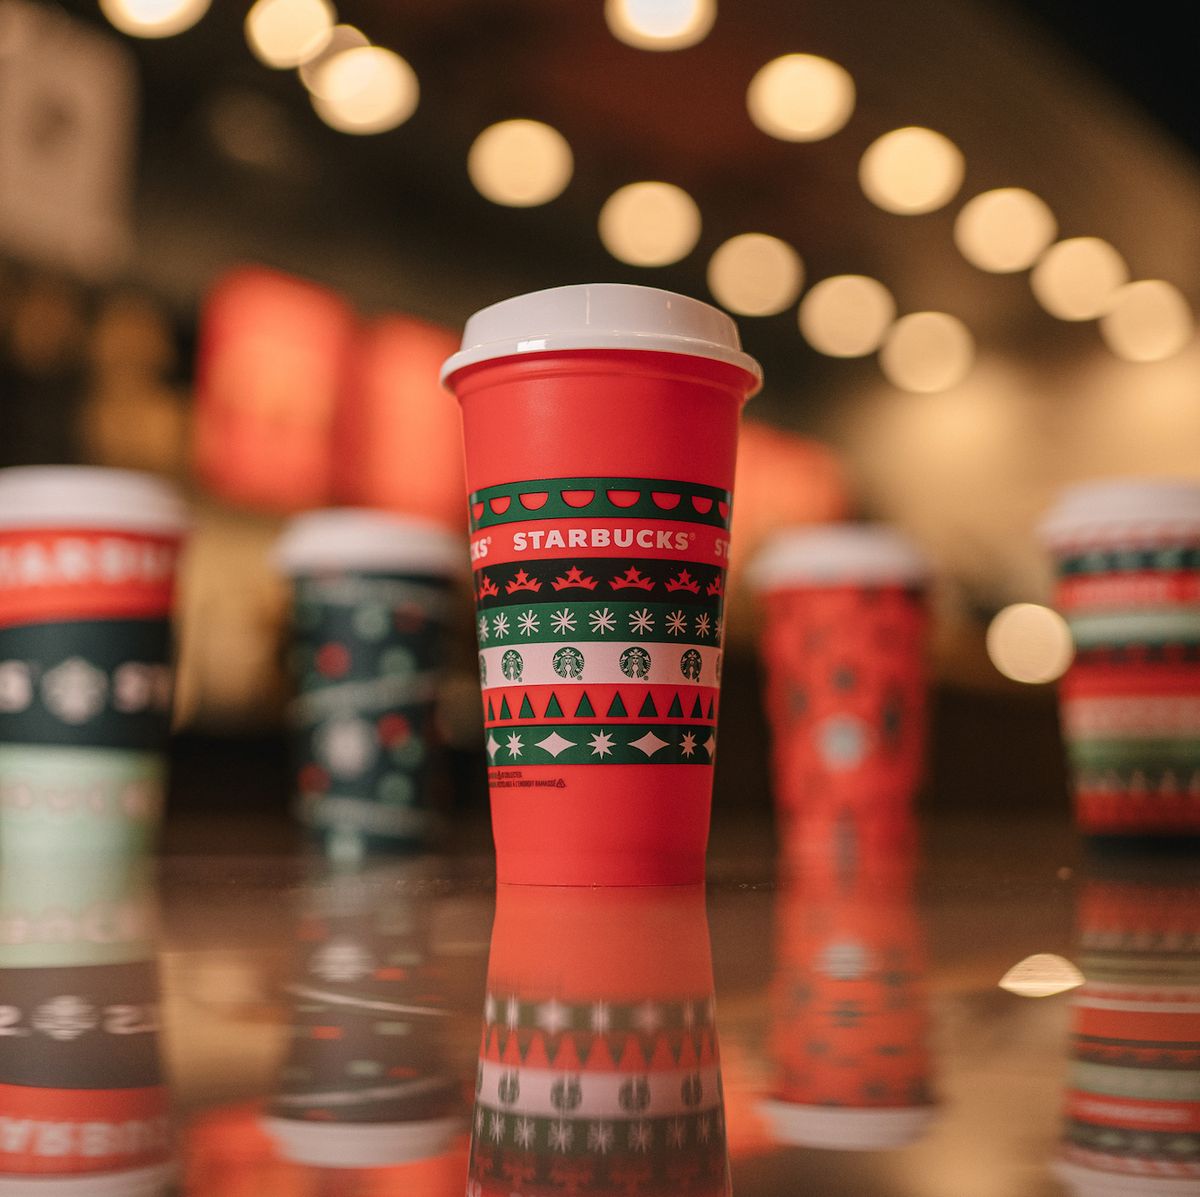 https://hips.hearstapps.com/hmg-prod/images/starbucks-holiday-cups-with-collectible-cup-jpg-1604521672.jpg?crop=0.668xw:1.00xh;0.167xw,0&resize=1200:*